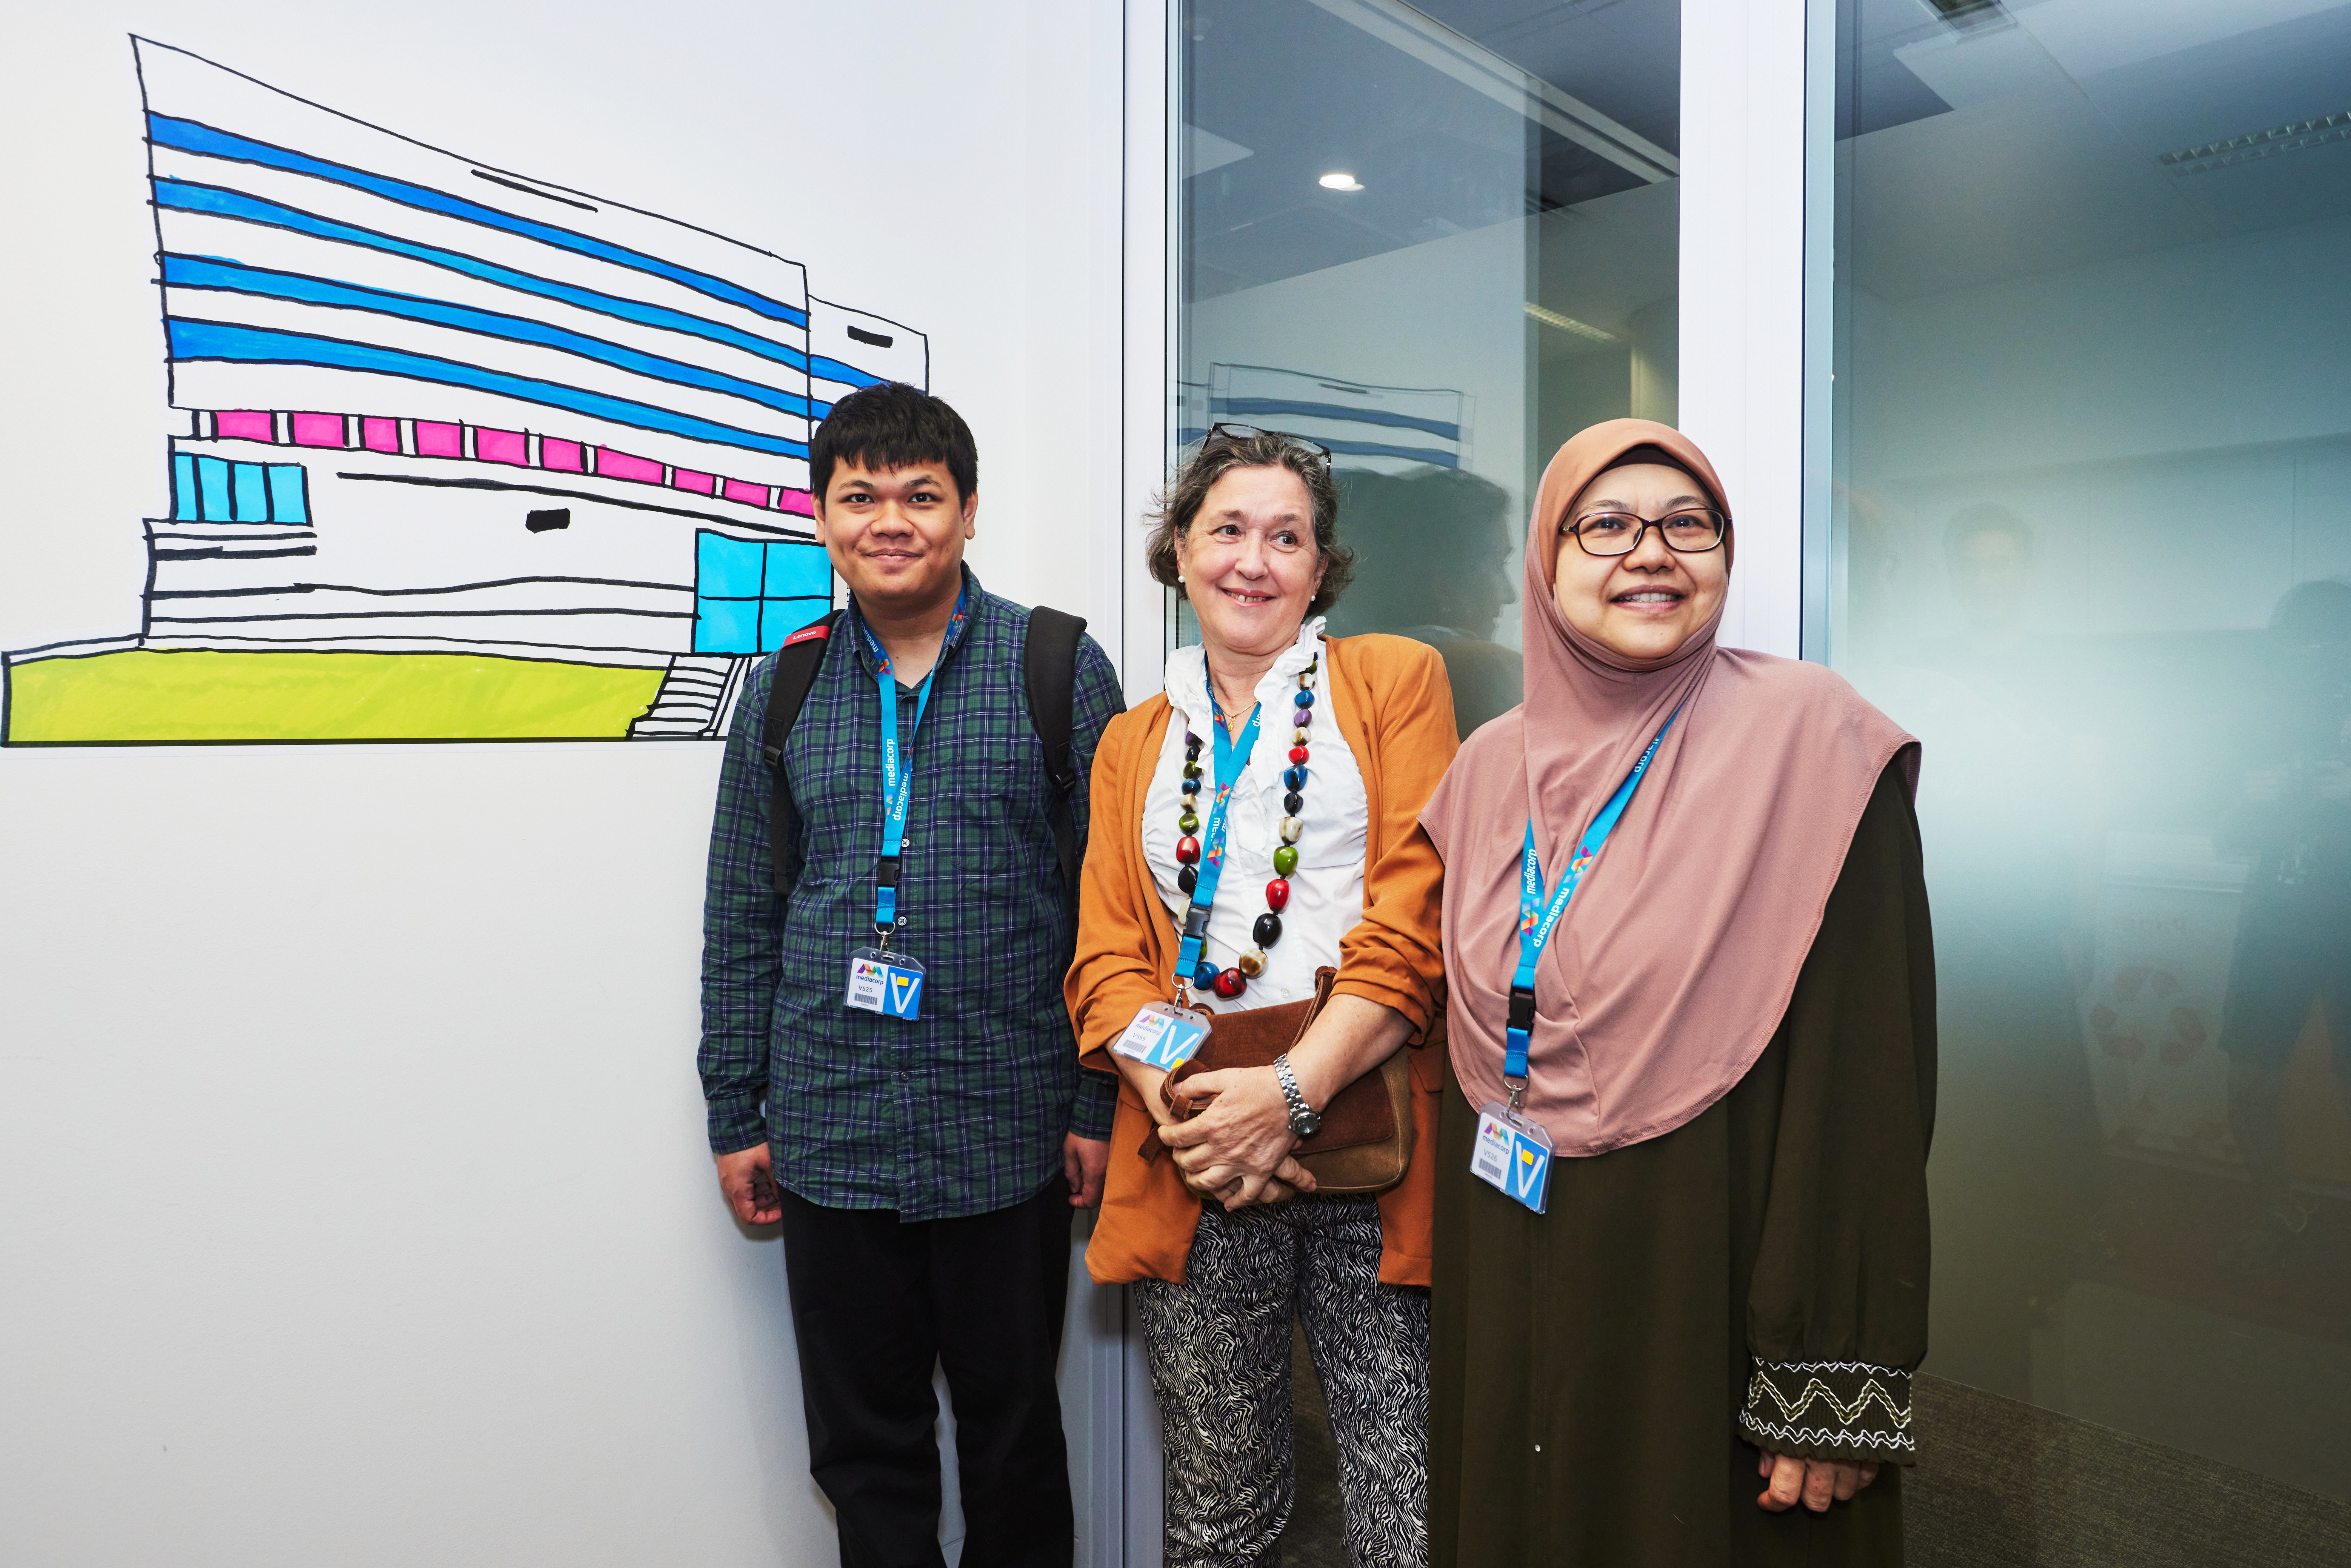 Muhammad Fadhil - Artist with autism from Metta Welfare Association, stands with his mother and Dr Esther Joosa in front of his sticker mural that features Mediacorp Campus building